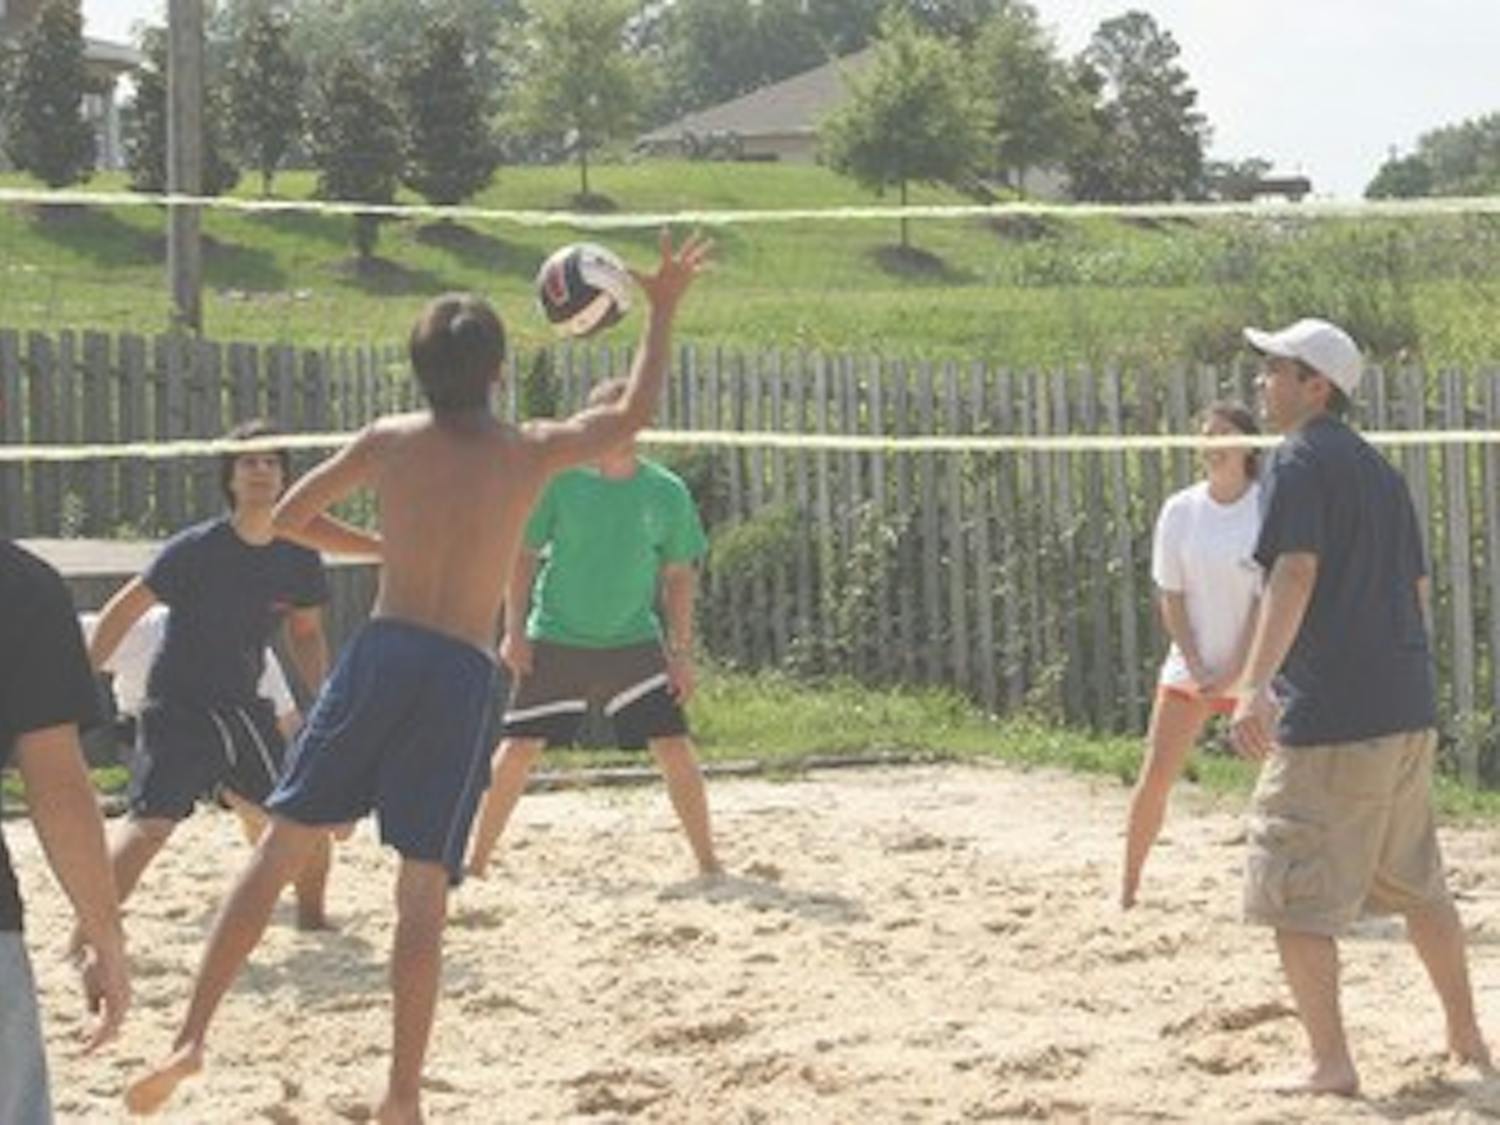 Members of the Delta Chi Fraternity and their friends take part in a friendly Saturday afternoon game of beach volleyball at their fraternity house on Lem Morrison.      Ashley Draa/Photo Editor